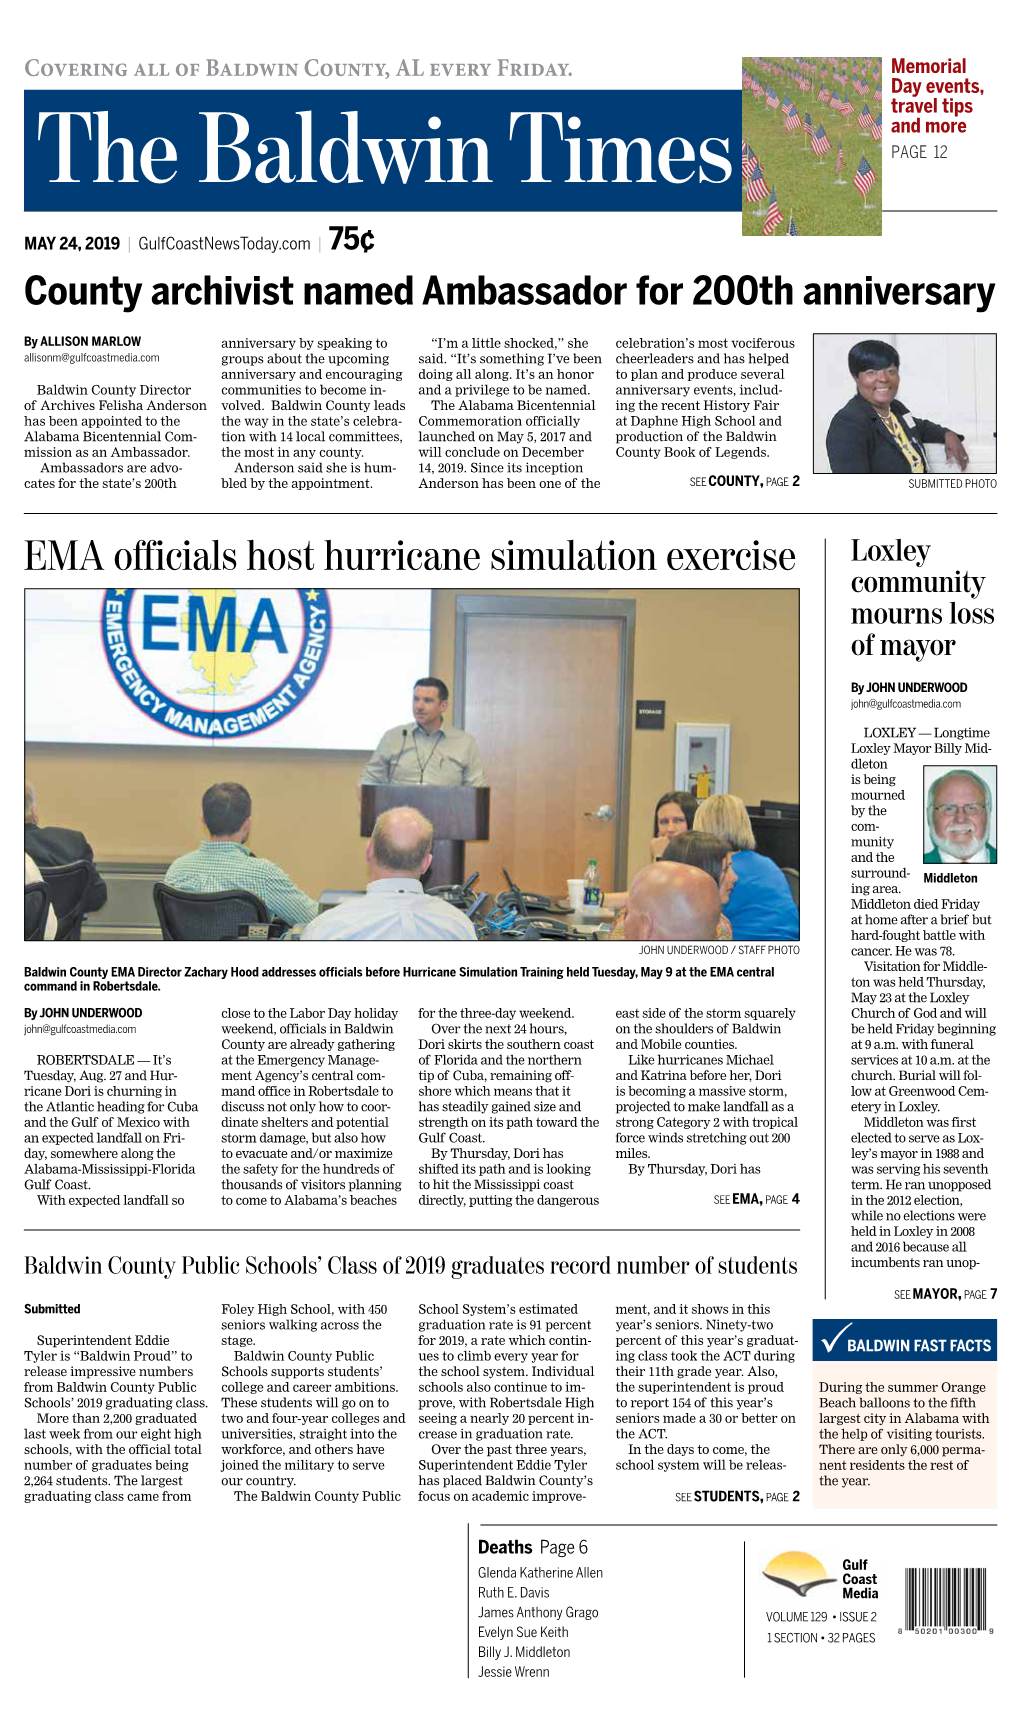 EMA Officials Host Hurricane Simulation Exercise Loxley Community Mourns Loss of Mayor